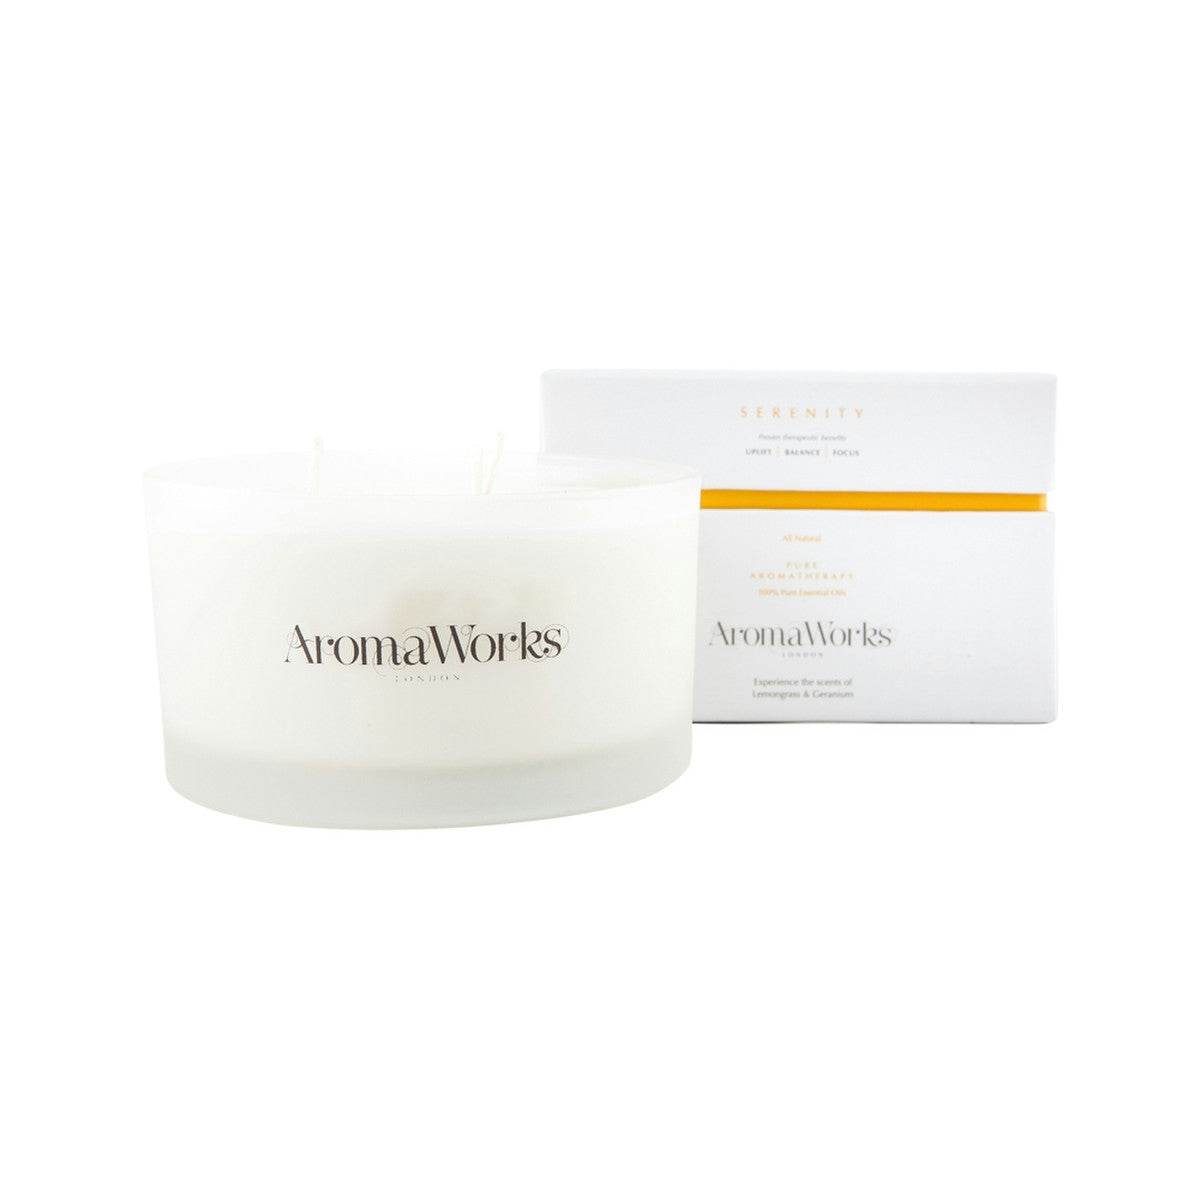 image of AromaWorks 3 Wick Candle Serenity Large 400g on white background